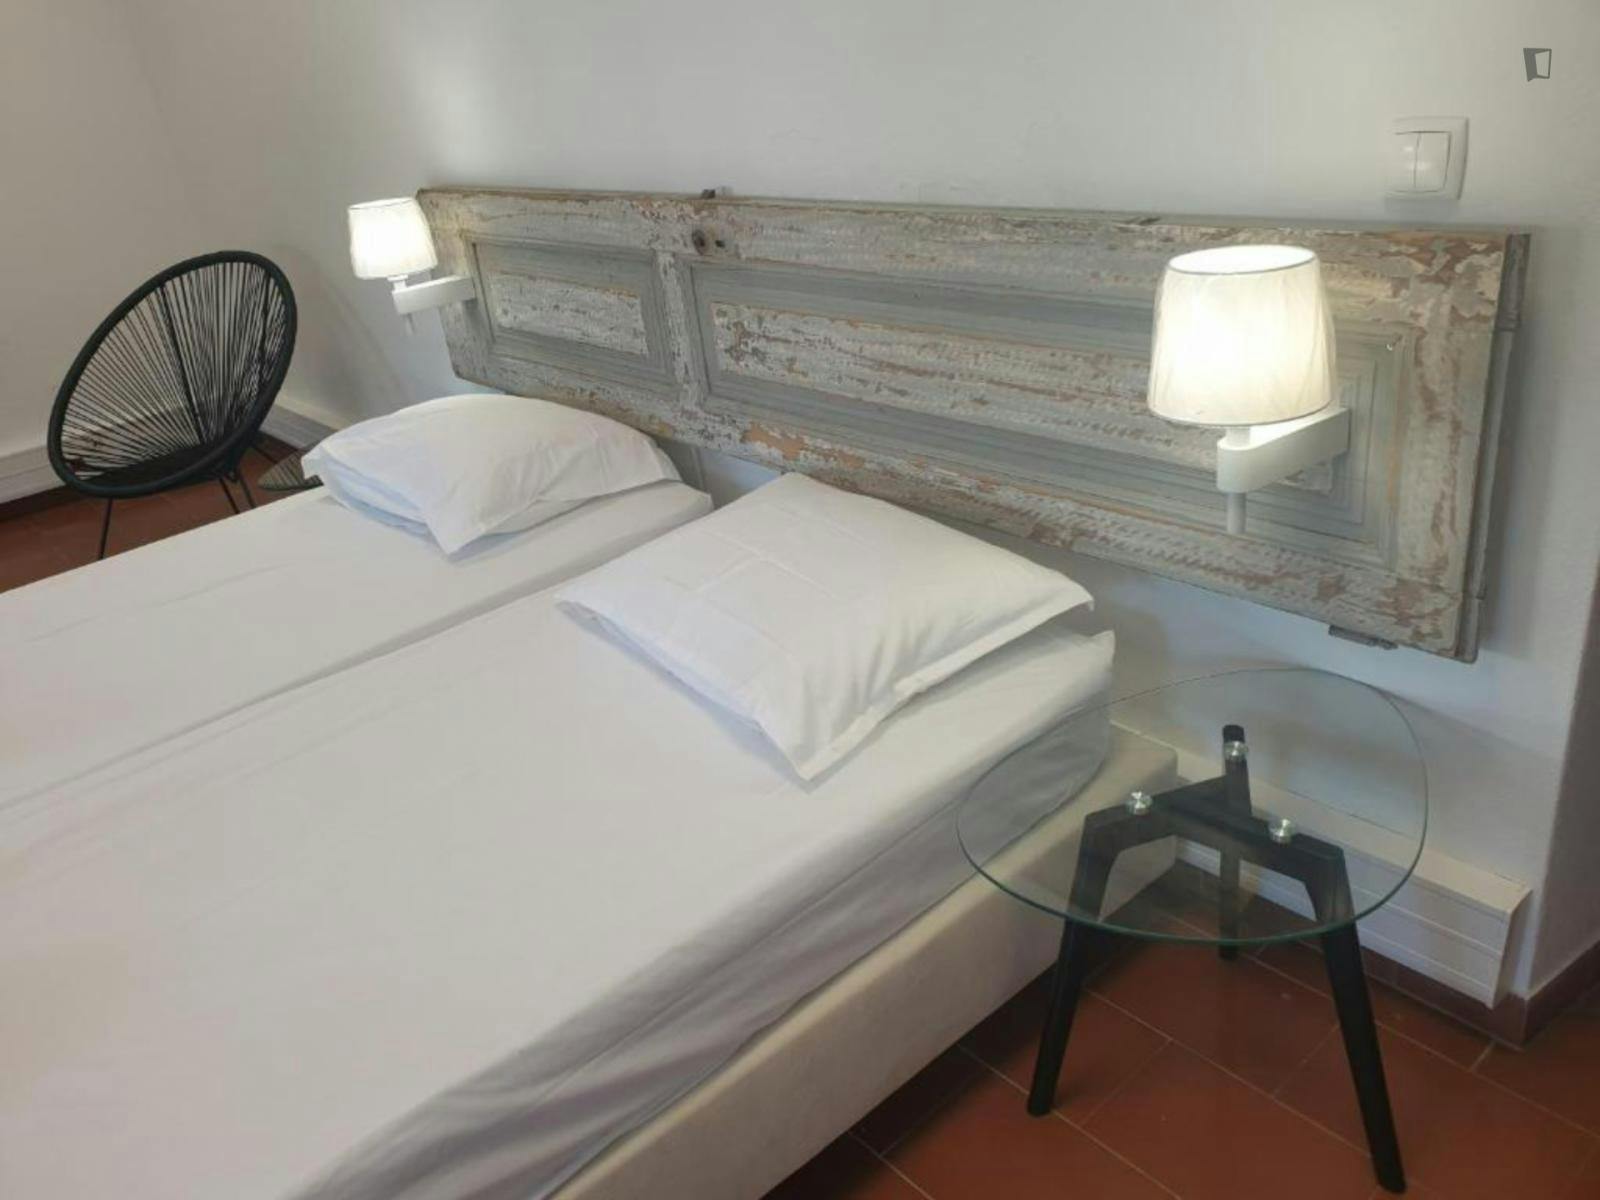 ALGOZ - Nice twin bedroom in Algoz and Tunes, municipality of Silves